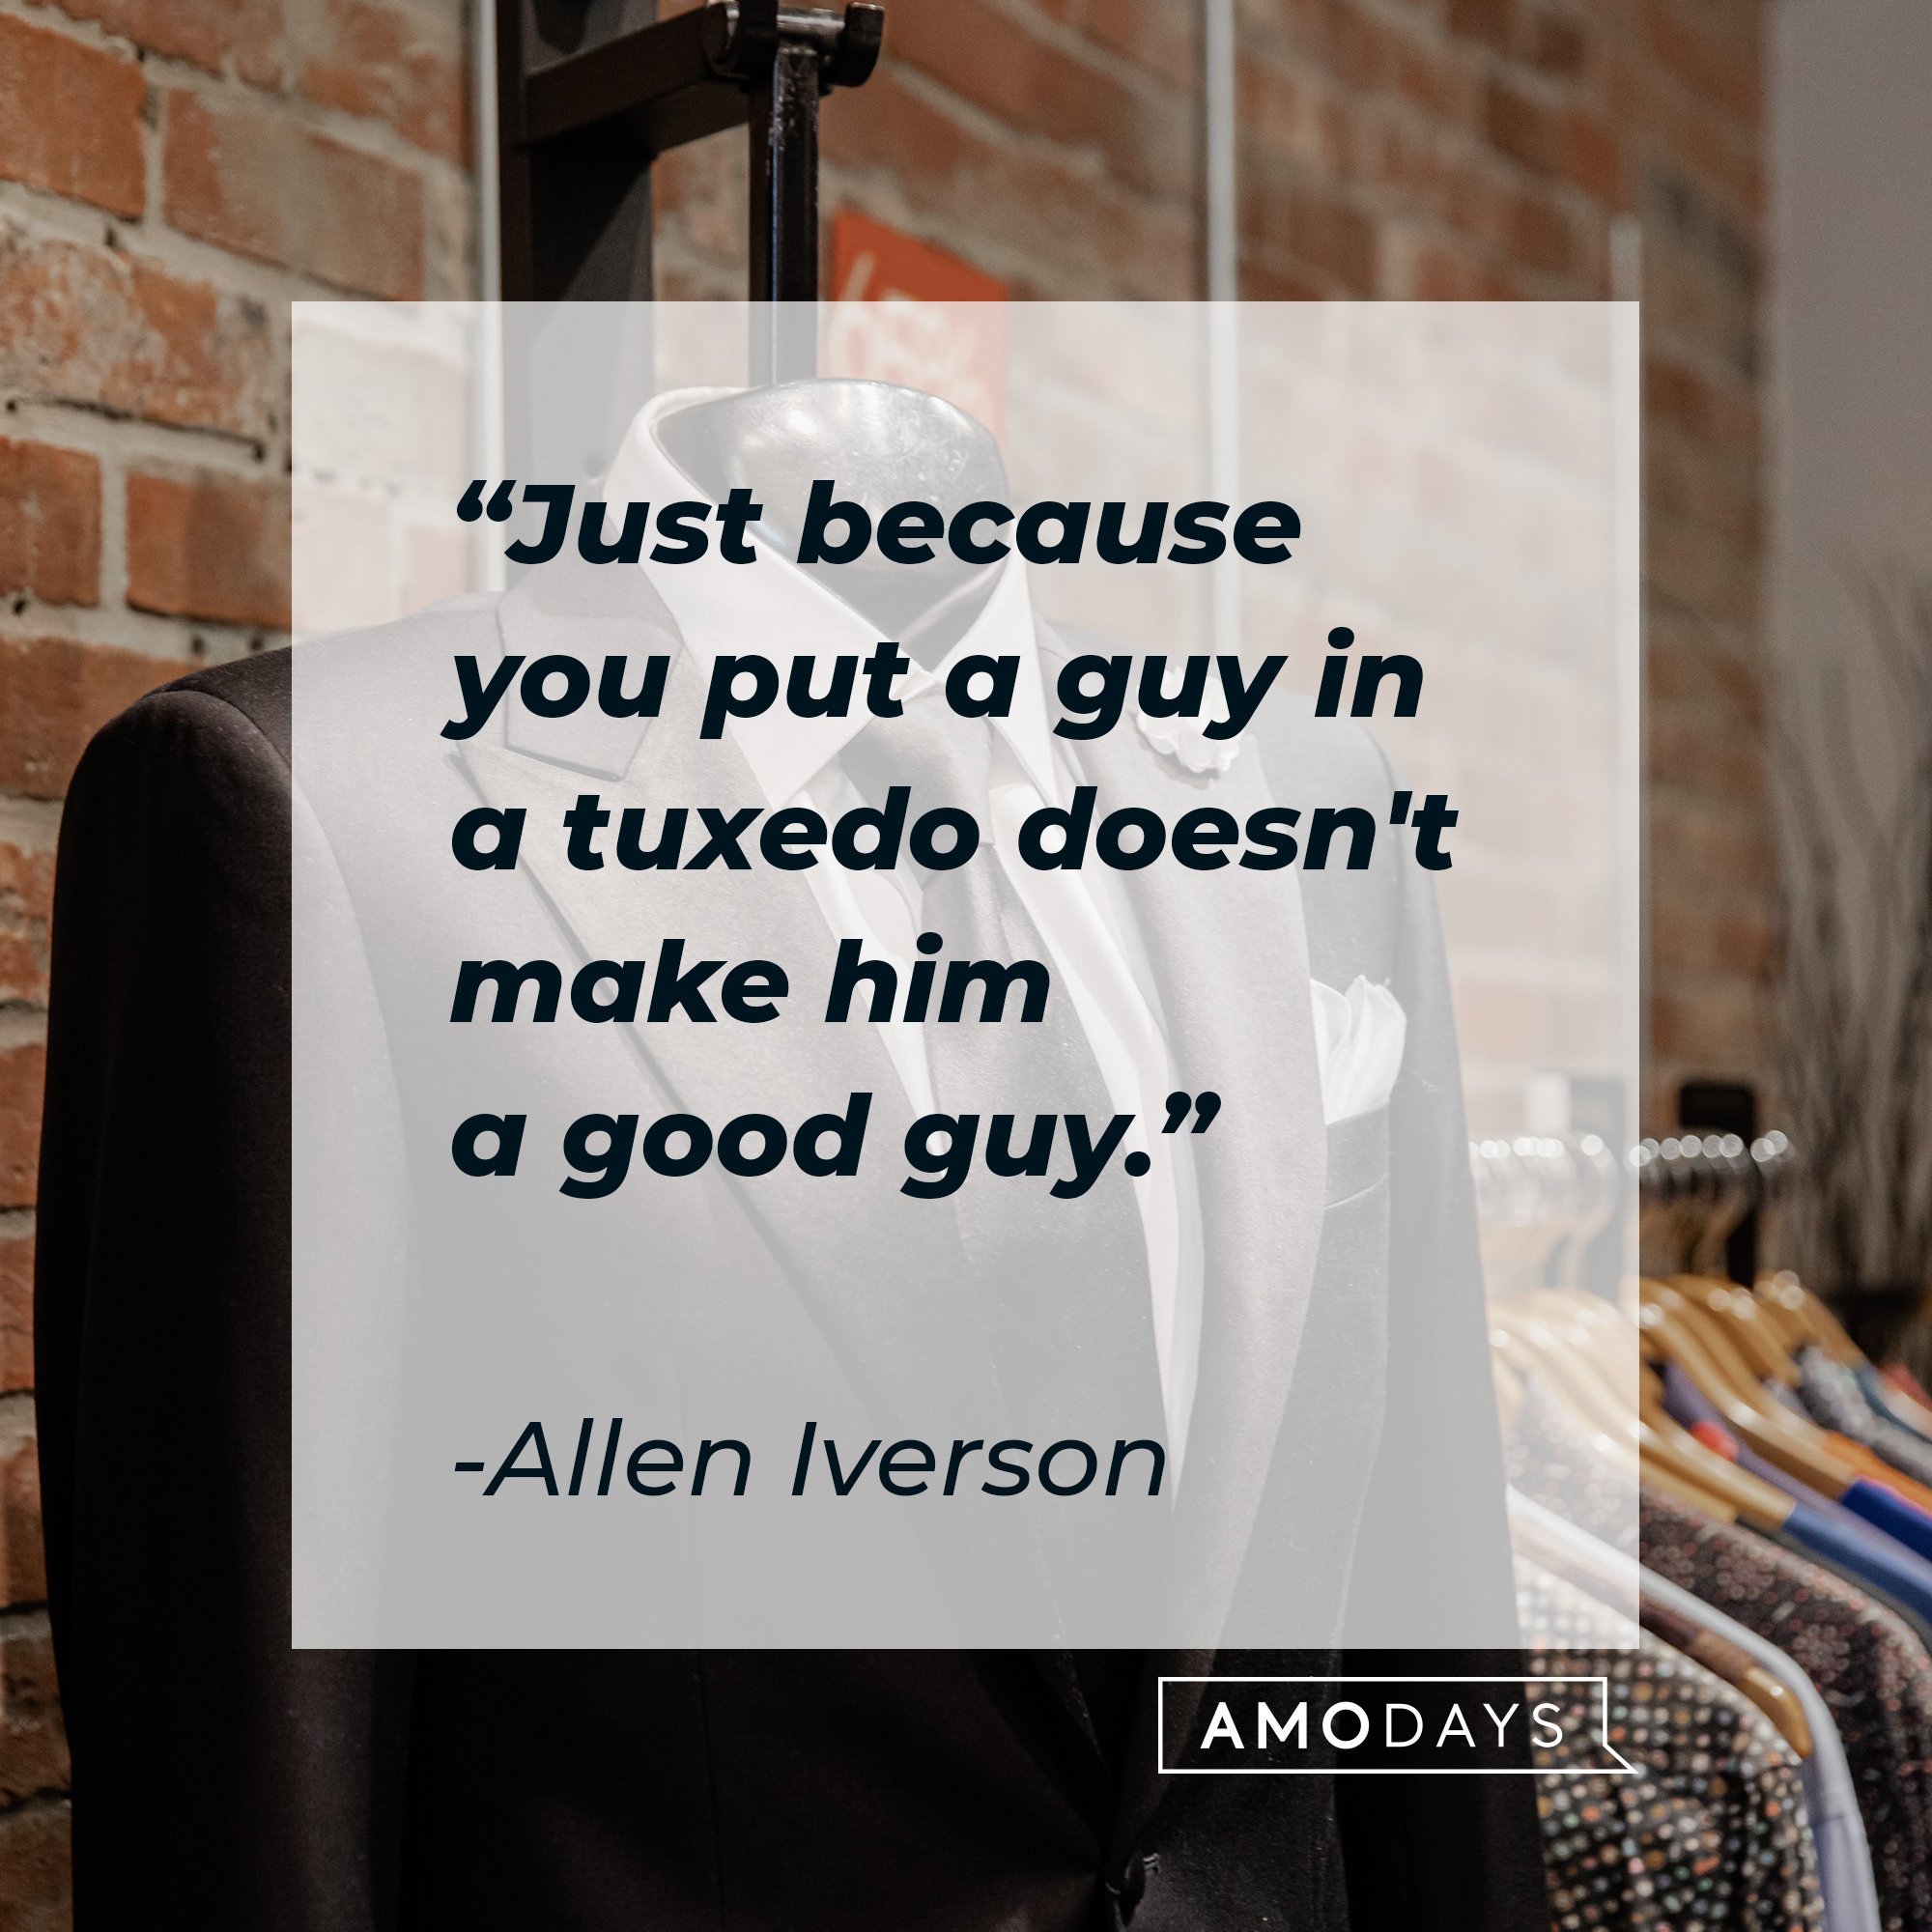 Allen Iverson's quote: “Just because you put a guy in a tuxedo doesn't make him a good guy." | Image: AmoDays